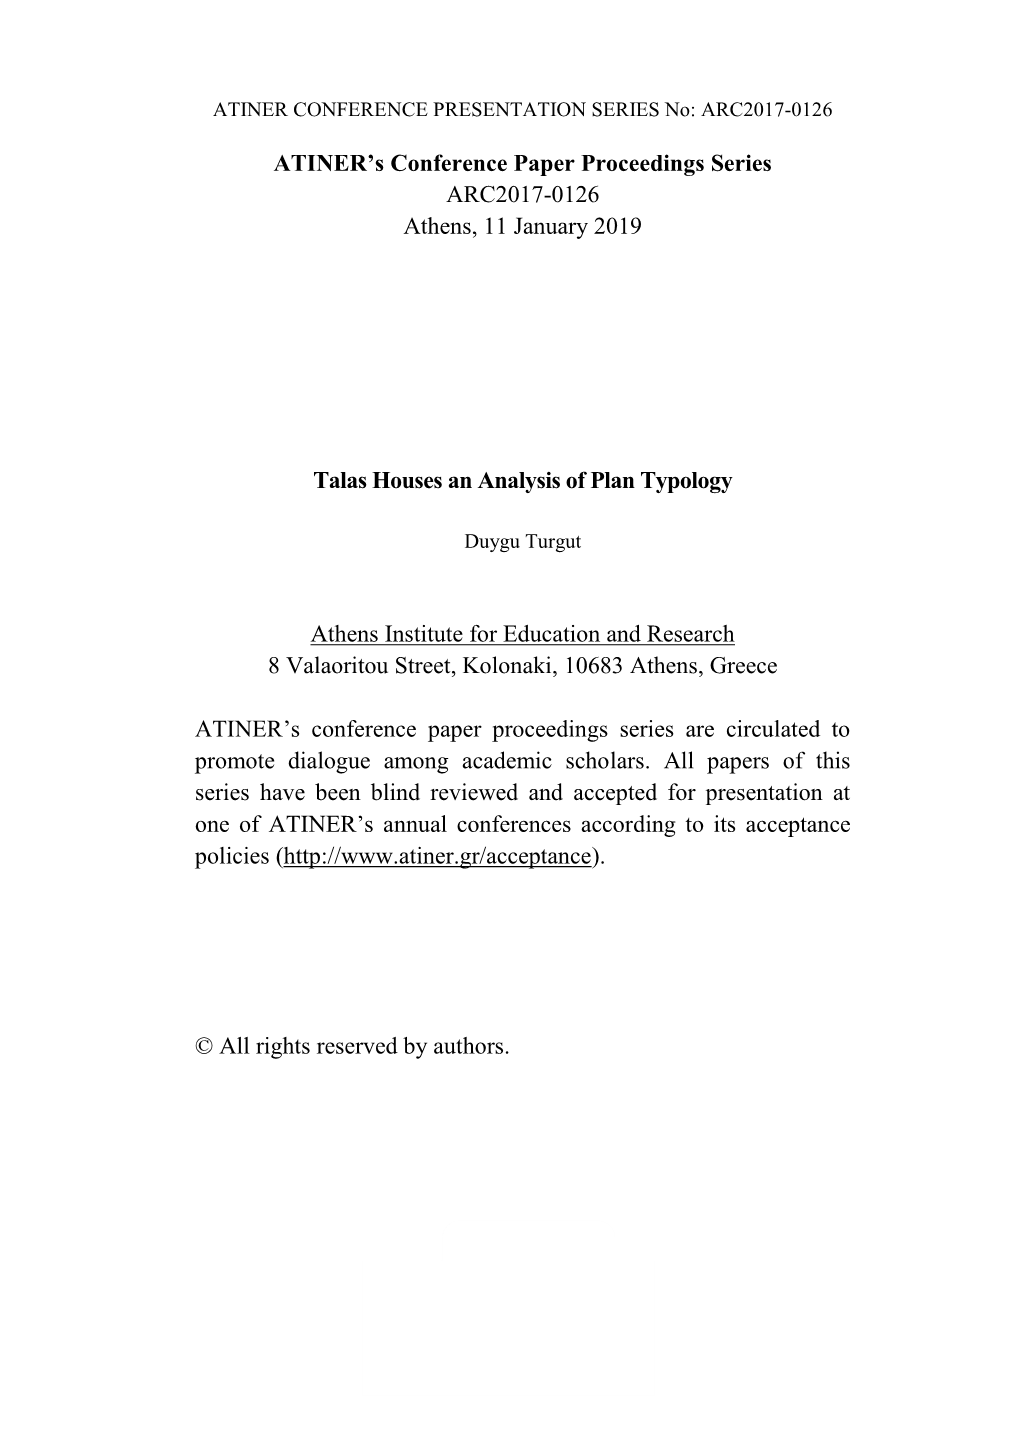 ATINER's Conference Paper Proceedings Series ARC2017-0126 Athens, 11 January 2019 Talas Houses an Analysis of Plan Typology At